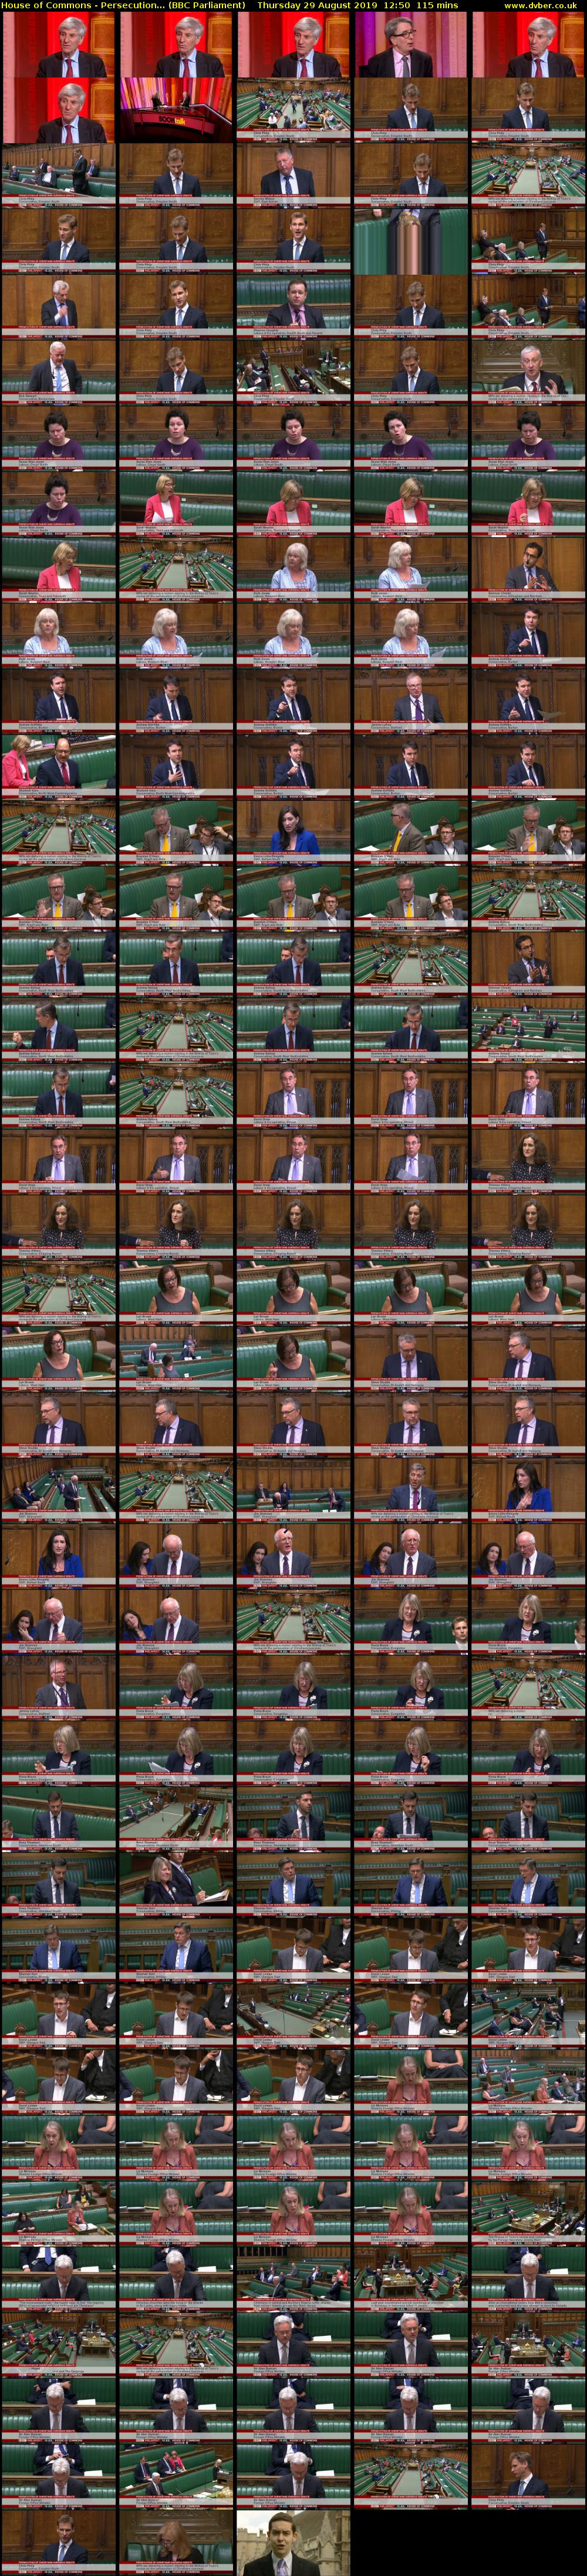 House of Commons - Persecution... (BBC Parliament) Thursday 29 August 2019 12:50 - 14:45